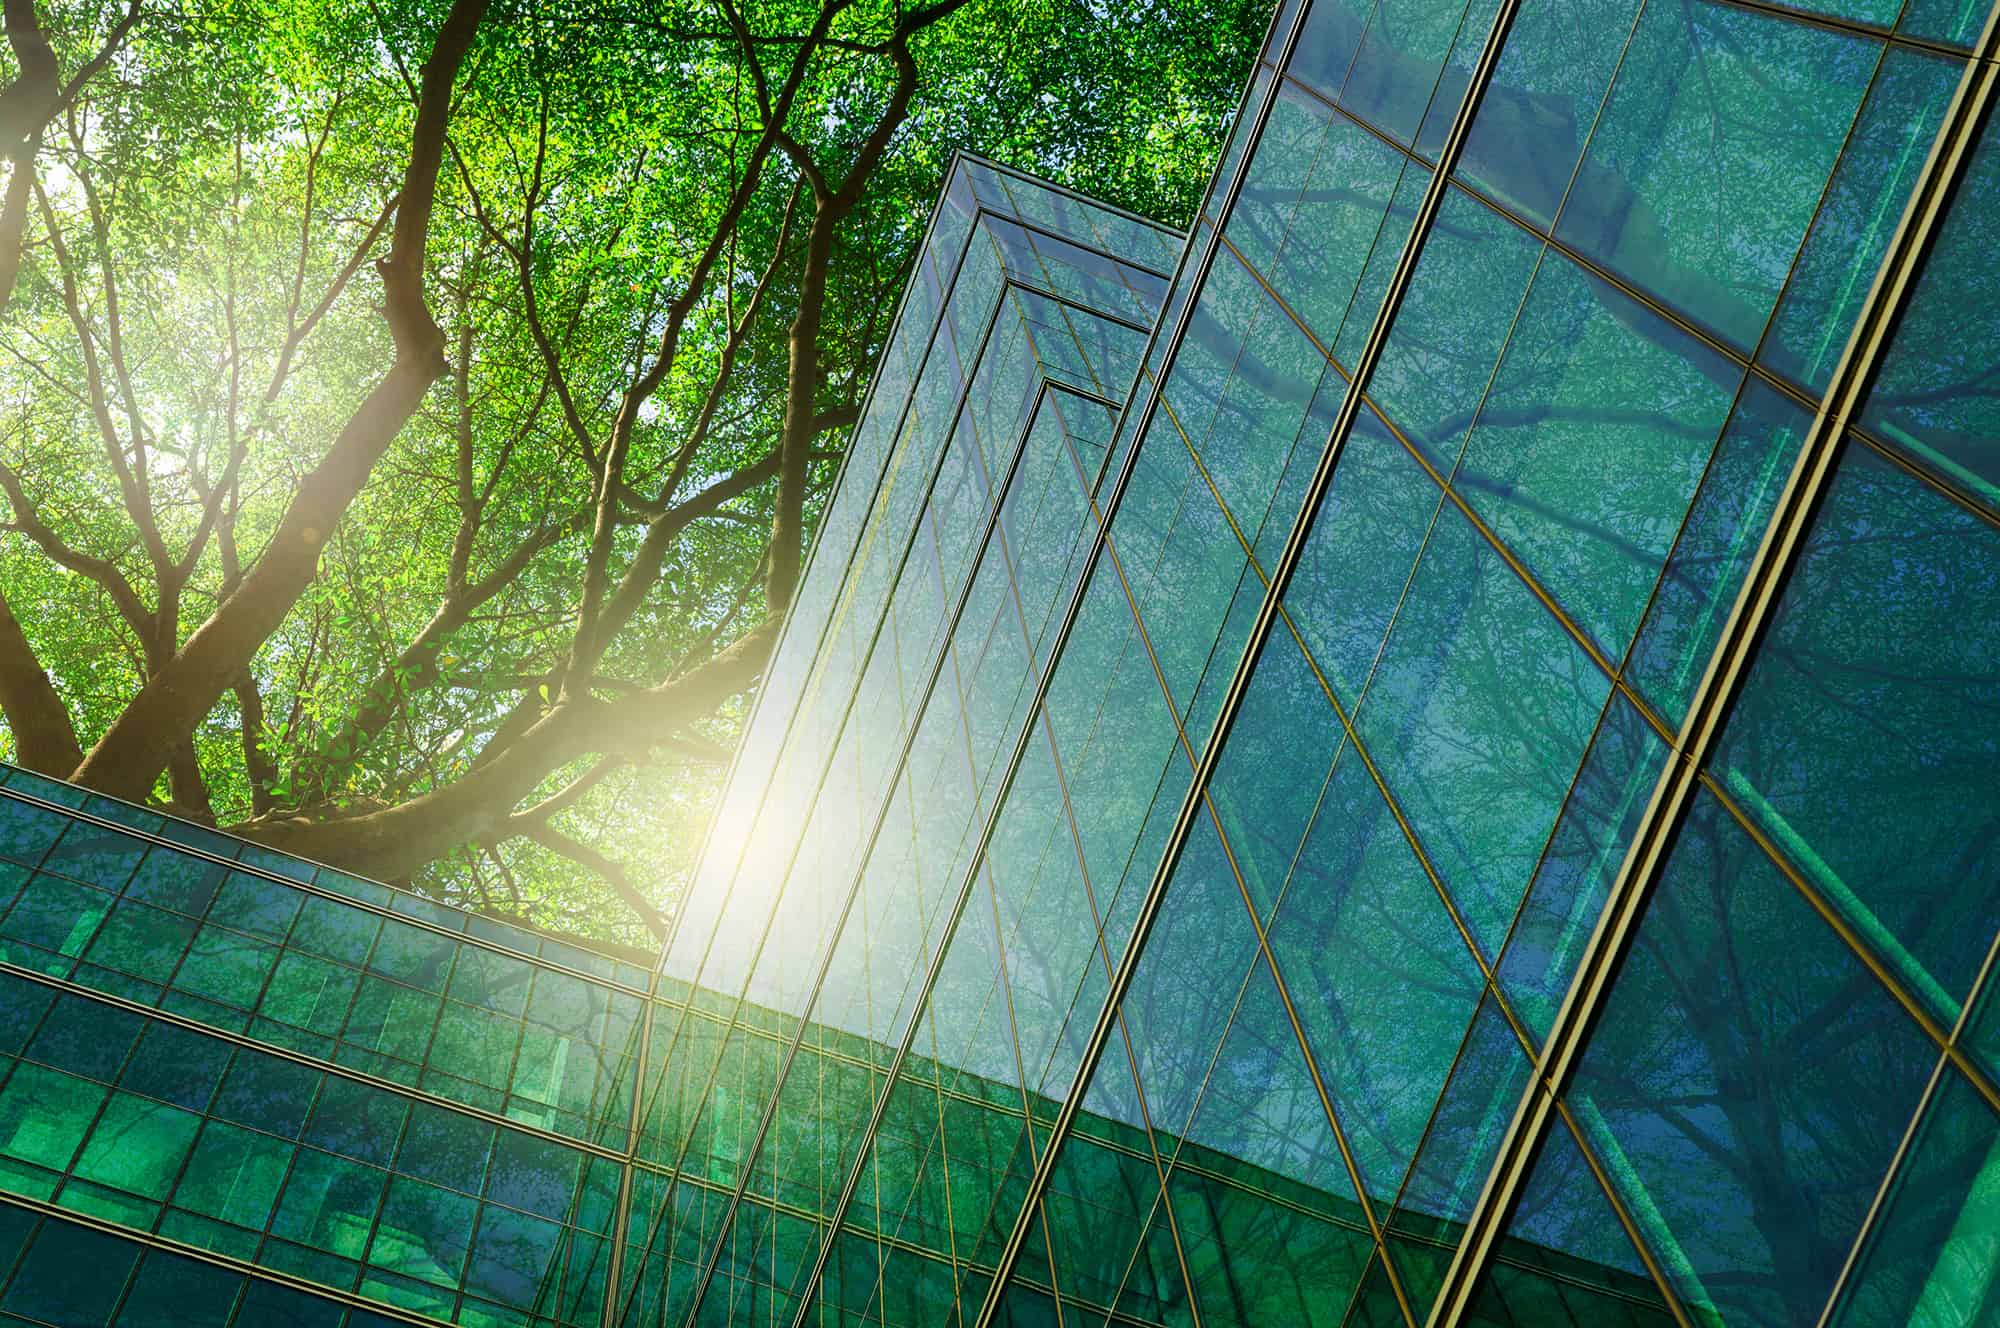 Sunlight filtering through green tree leaves onto the reflective glass facade of a modern building.